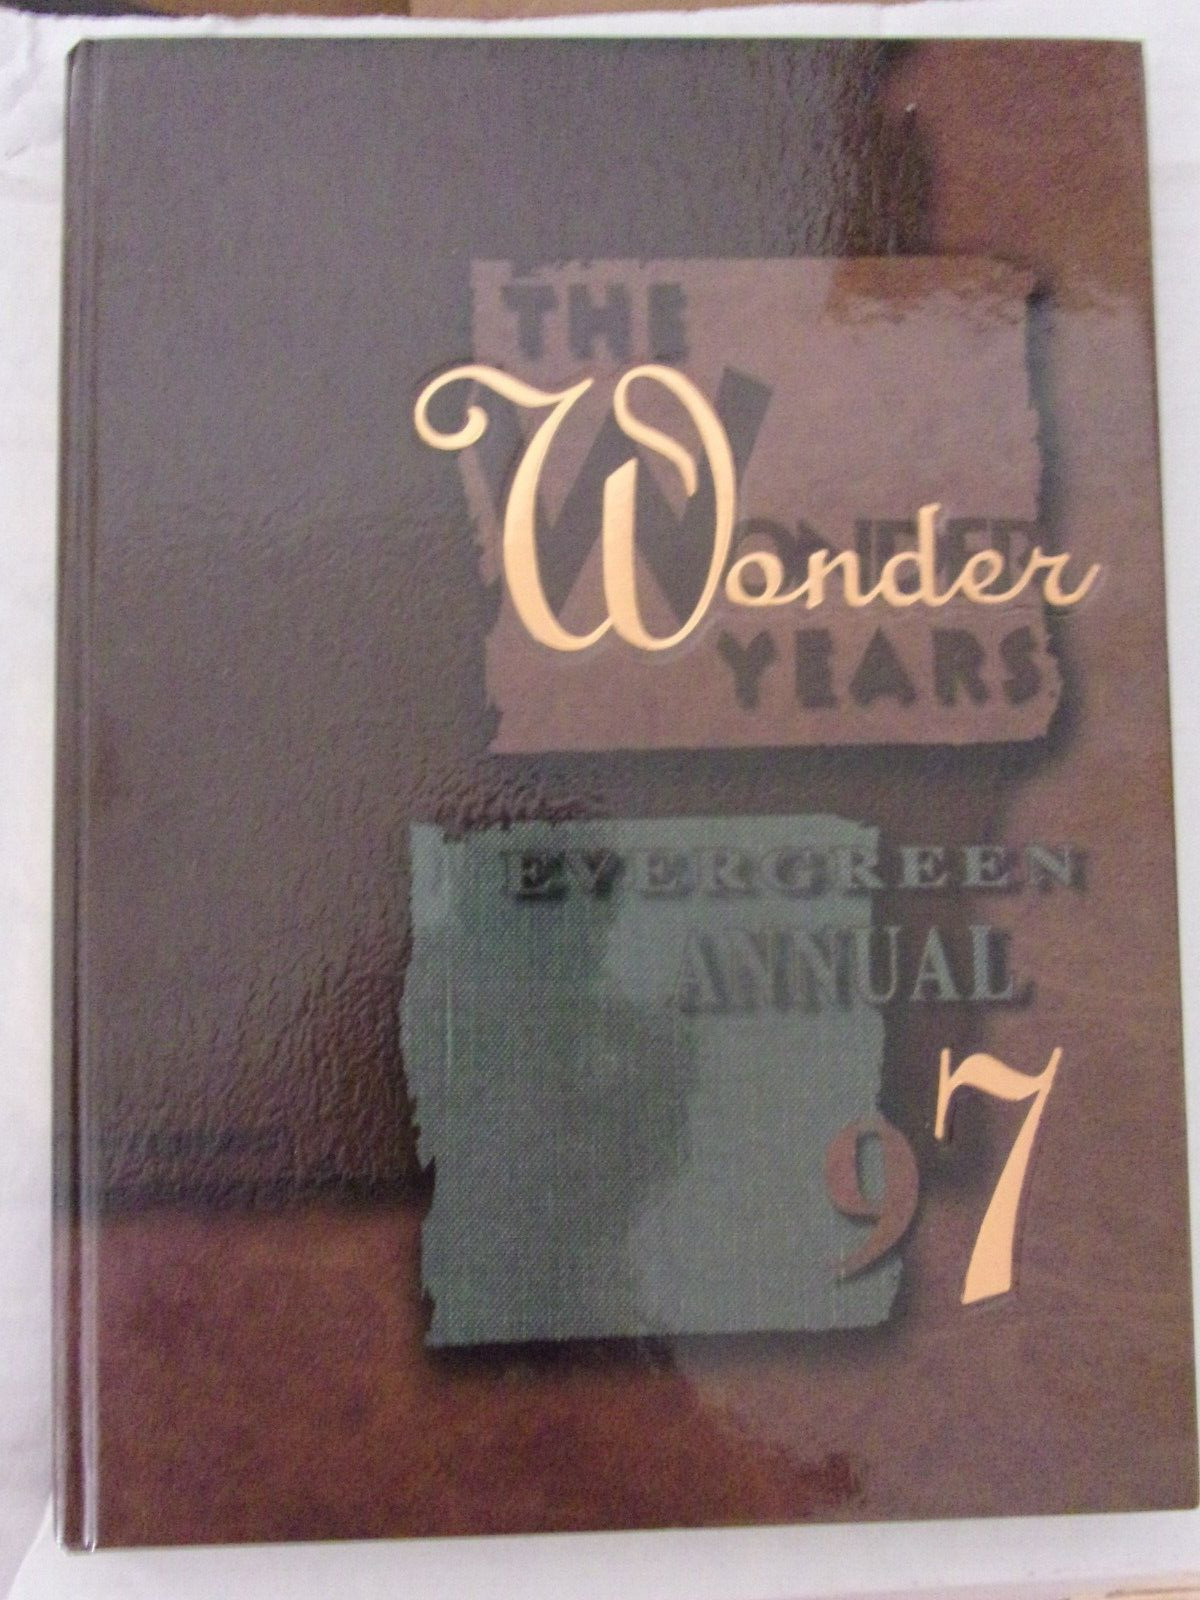 Yearbook - The Wonder Years - 1997 Loyola College, Baltimore, MD Vol. 94